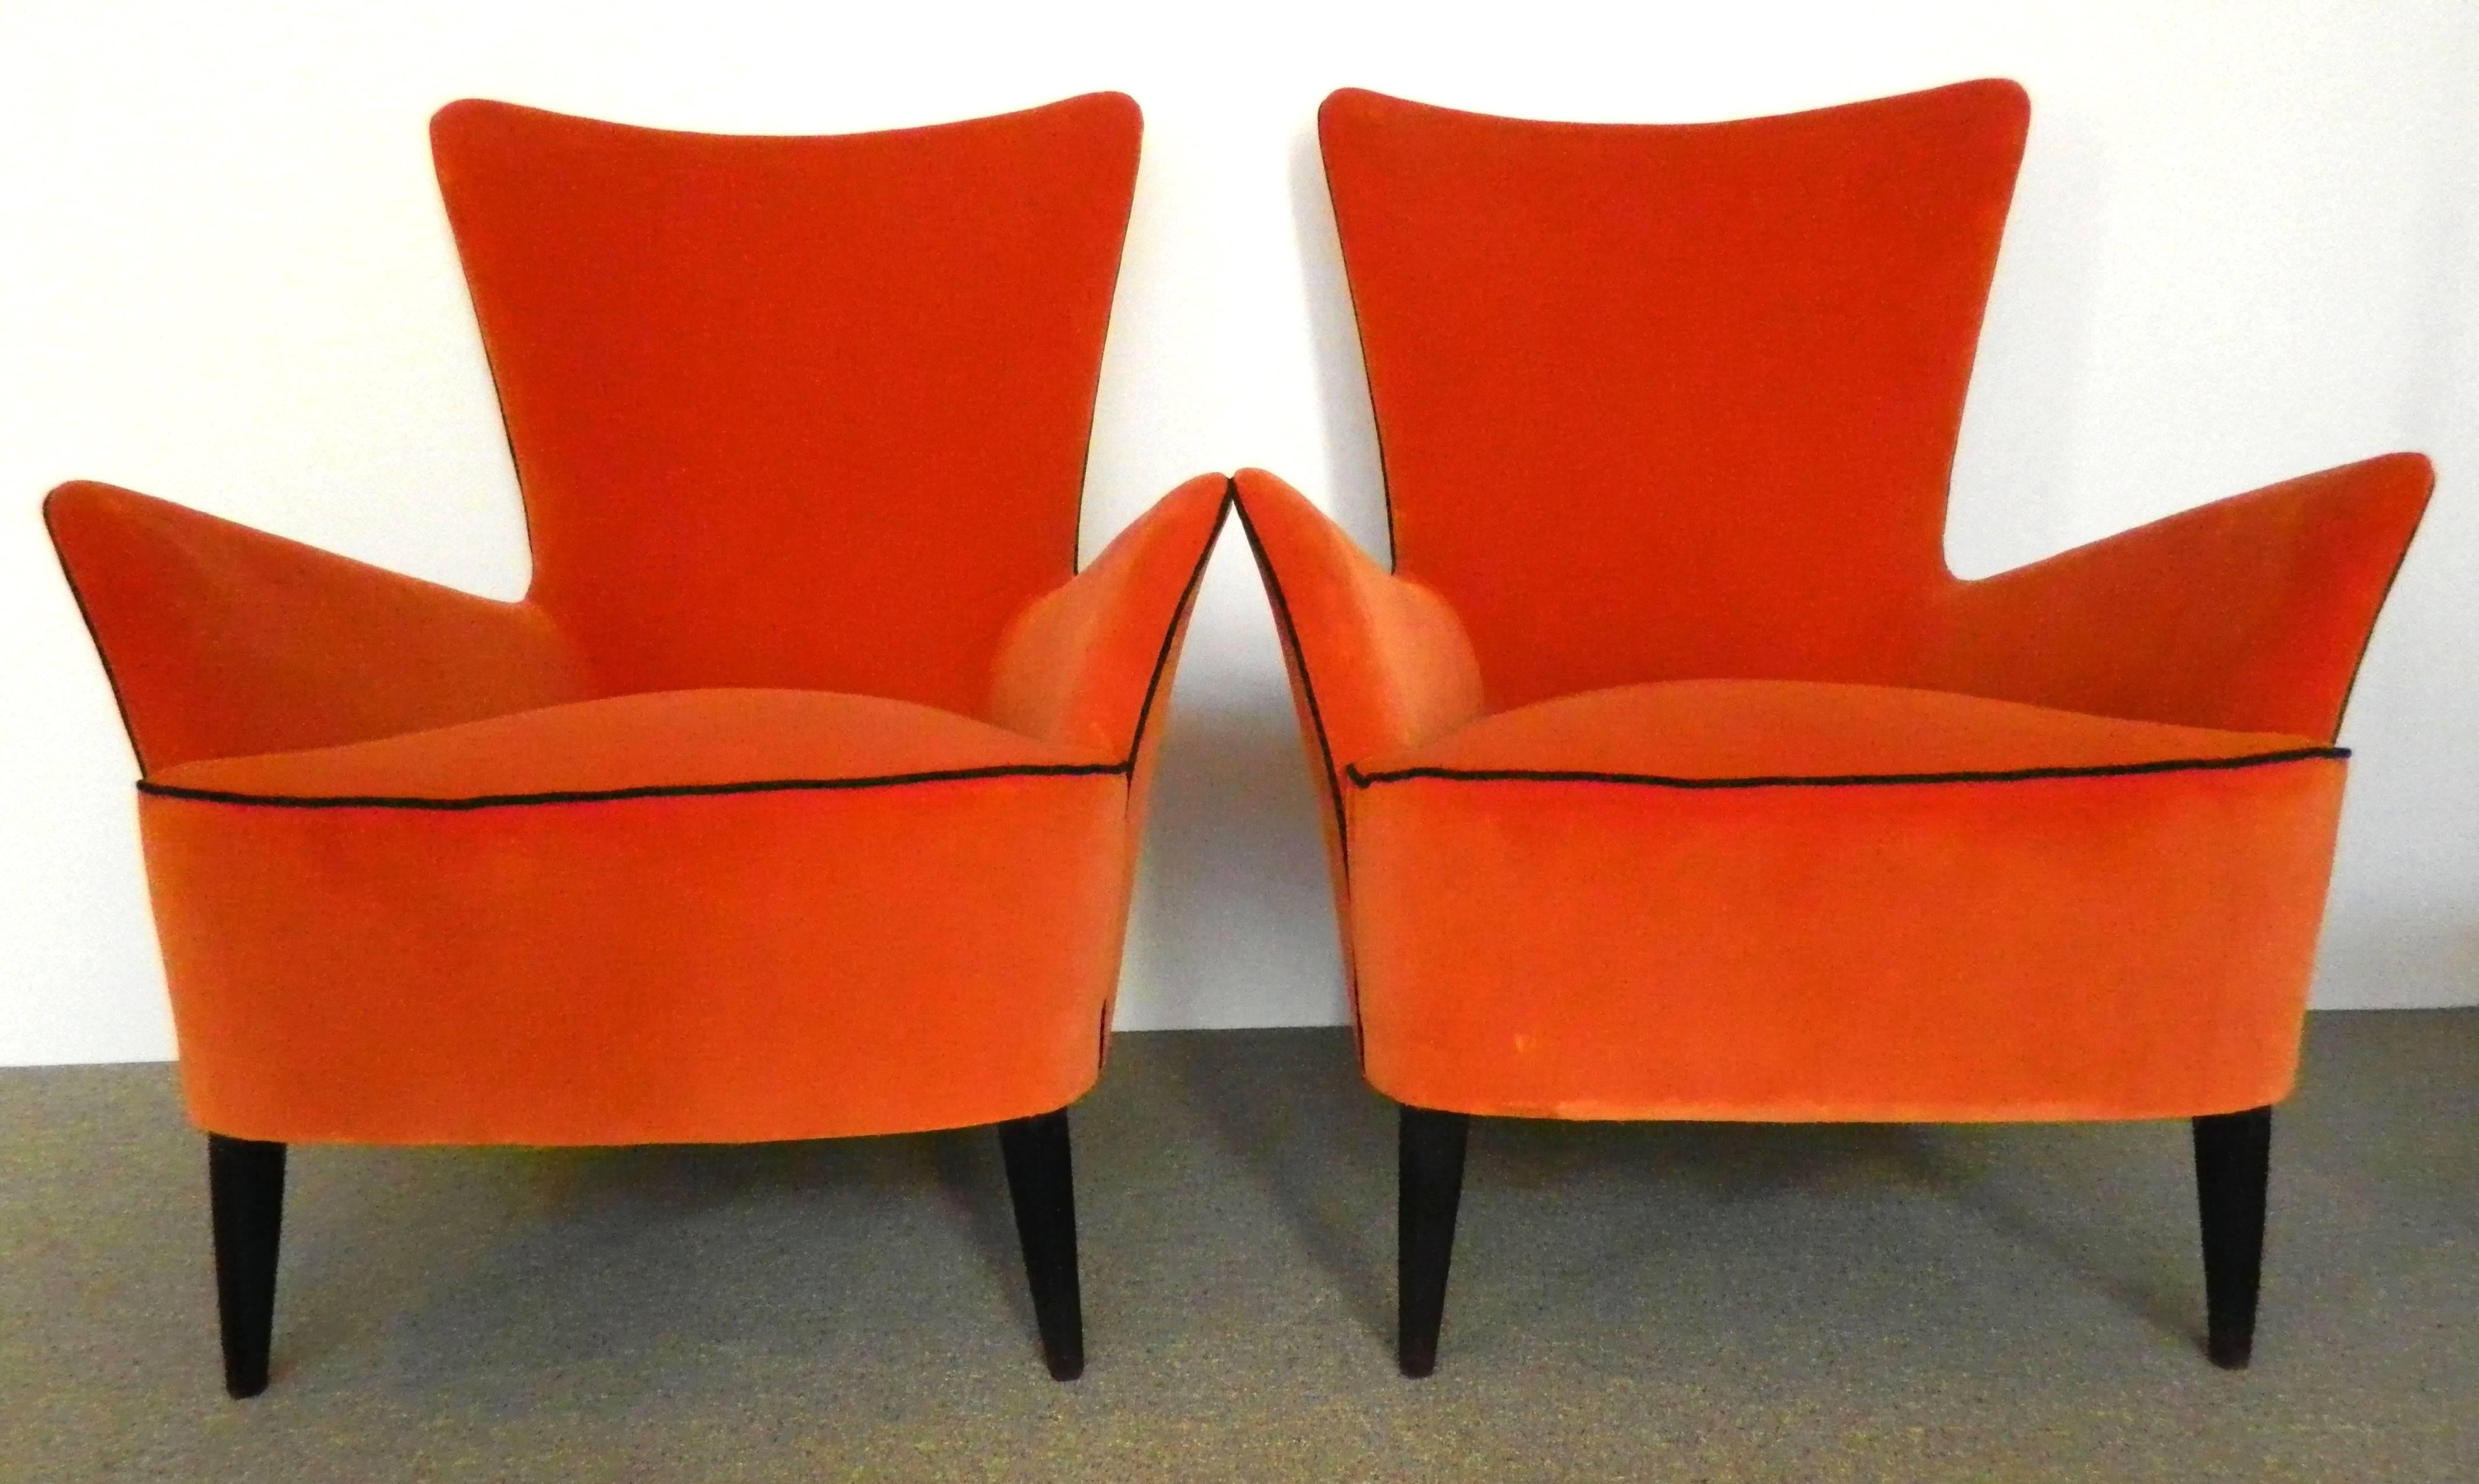 Pair of Mid-Century Italian armchairs with wood legs. Newly upholstered. They are great looking and comfortable.